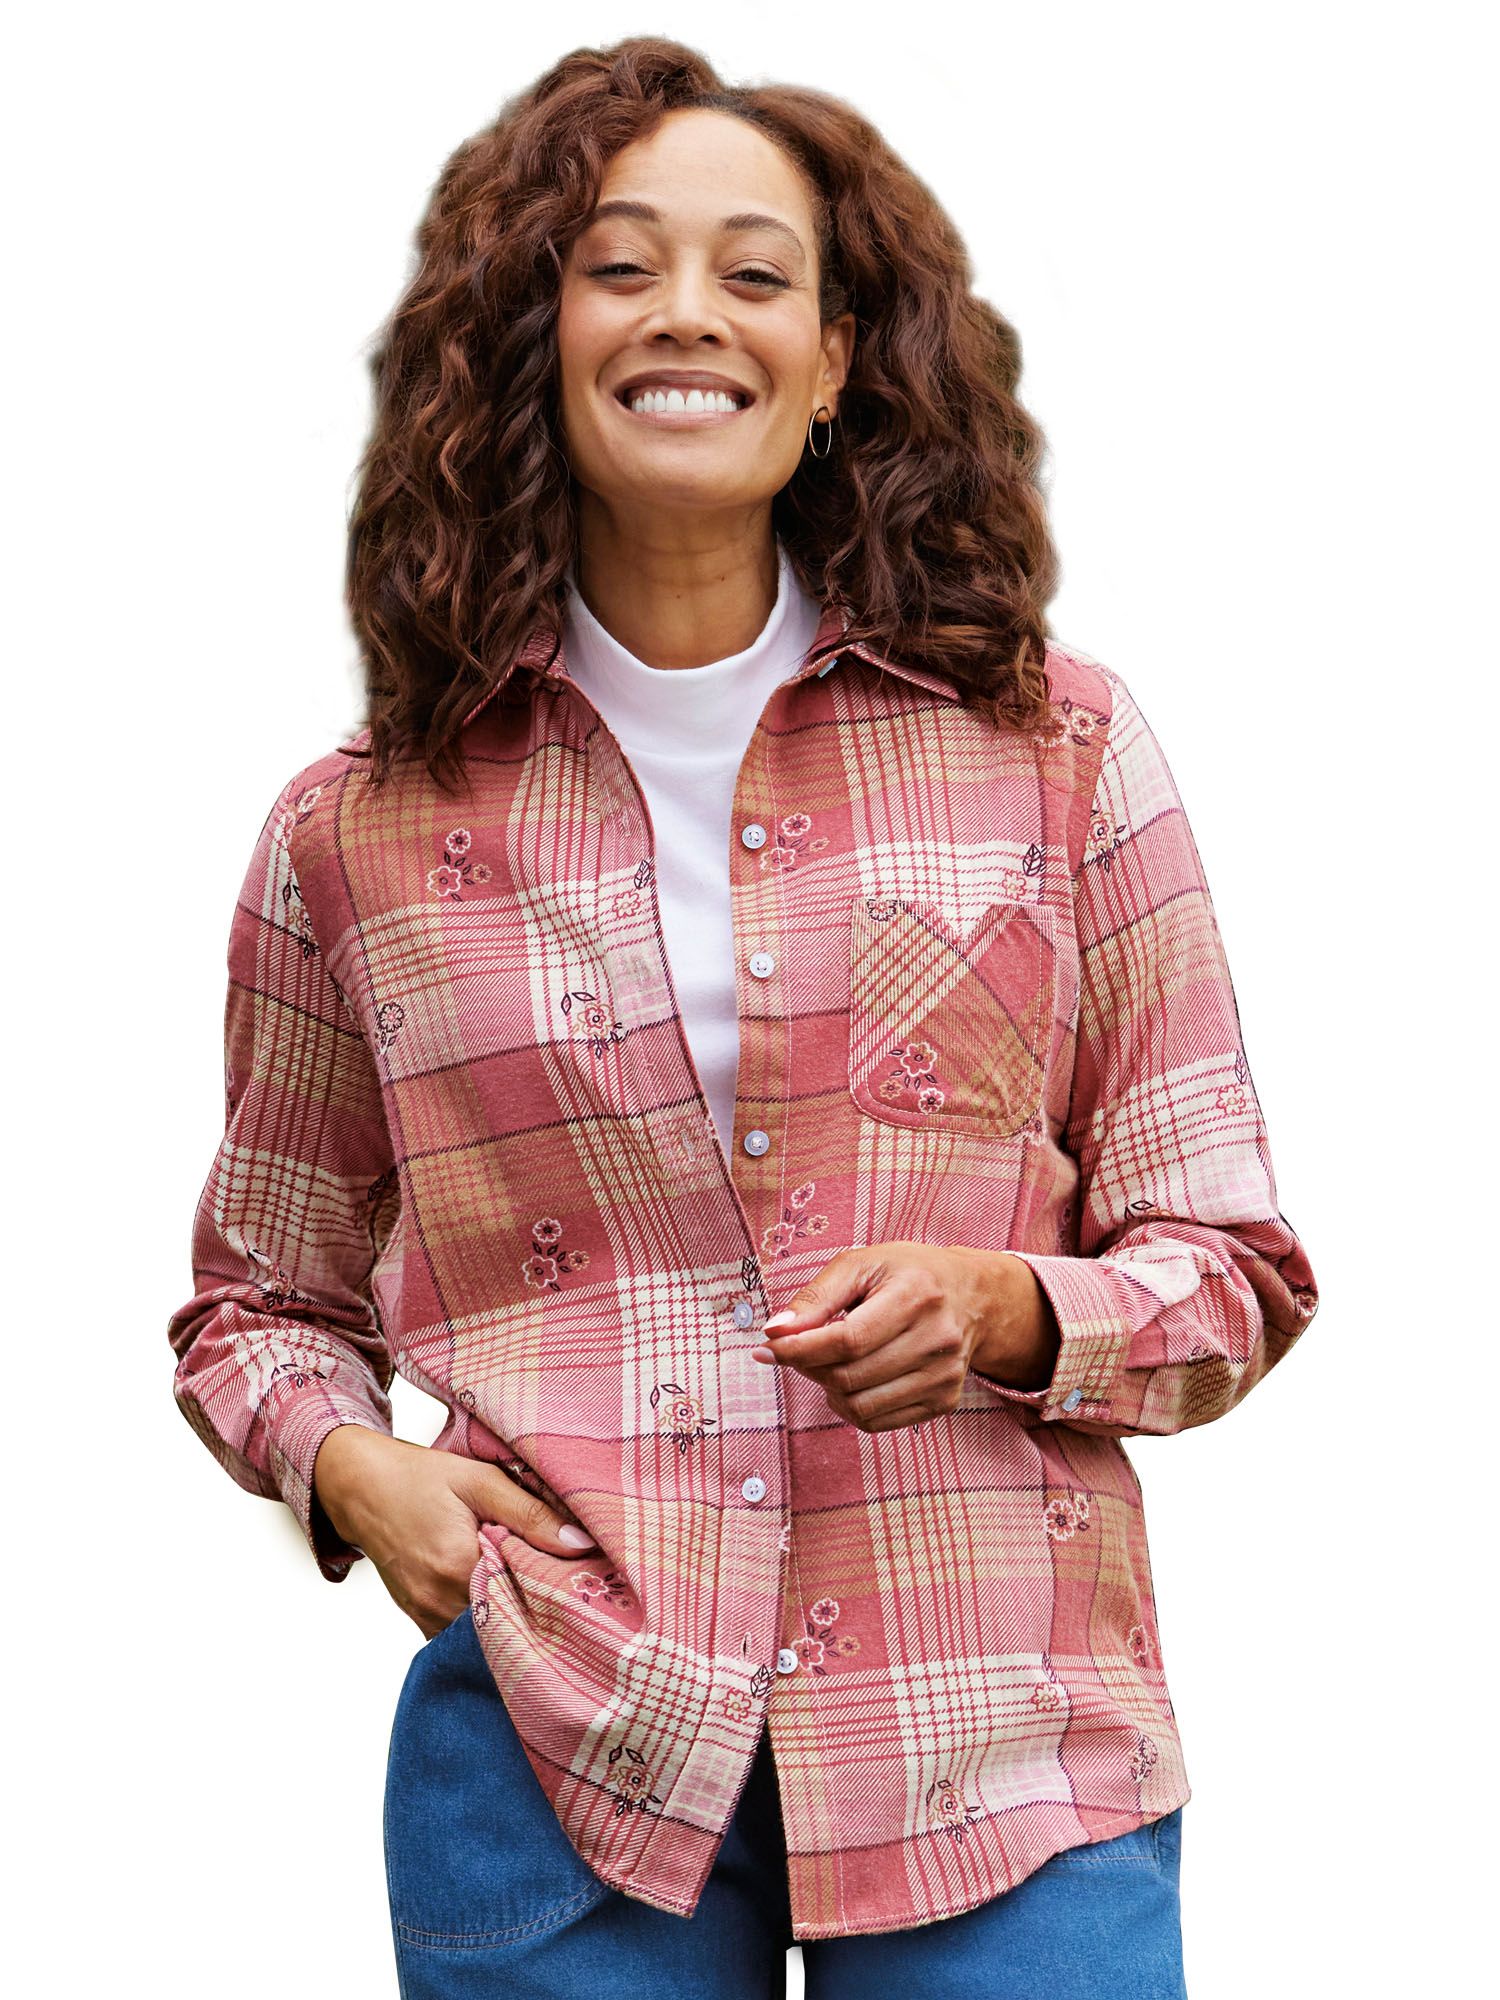 NEW American Sweetheart Soft Flannel Plaid Classic Collar Button Up Blouse Shirt 